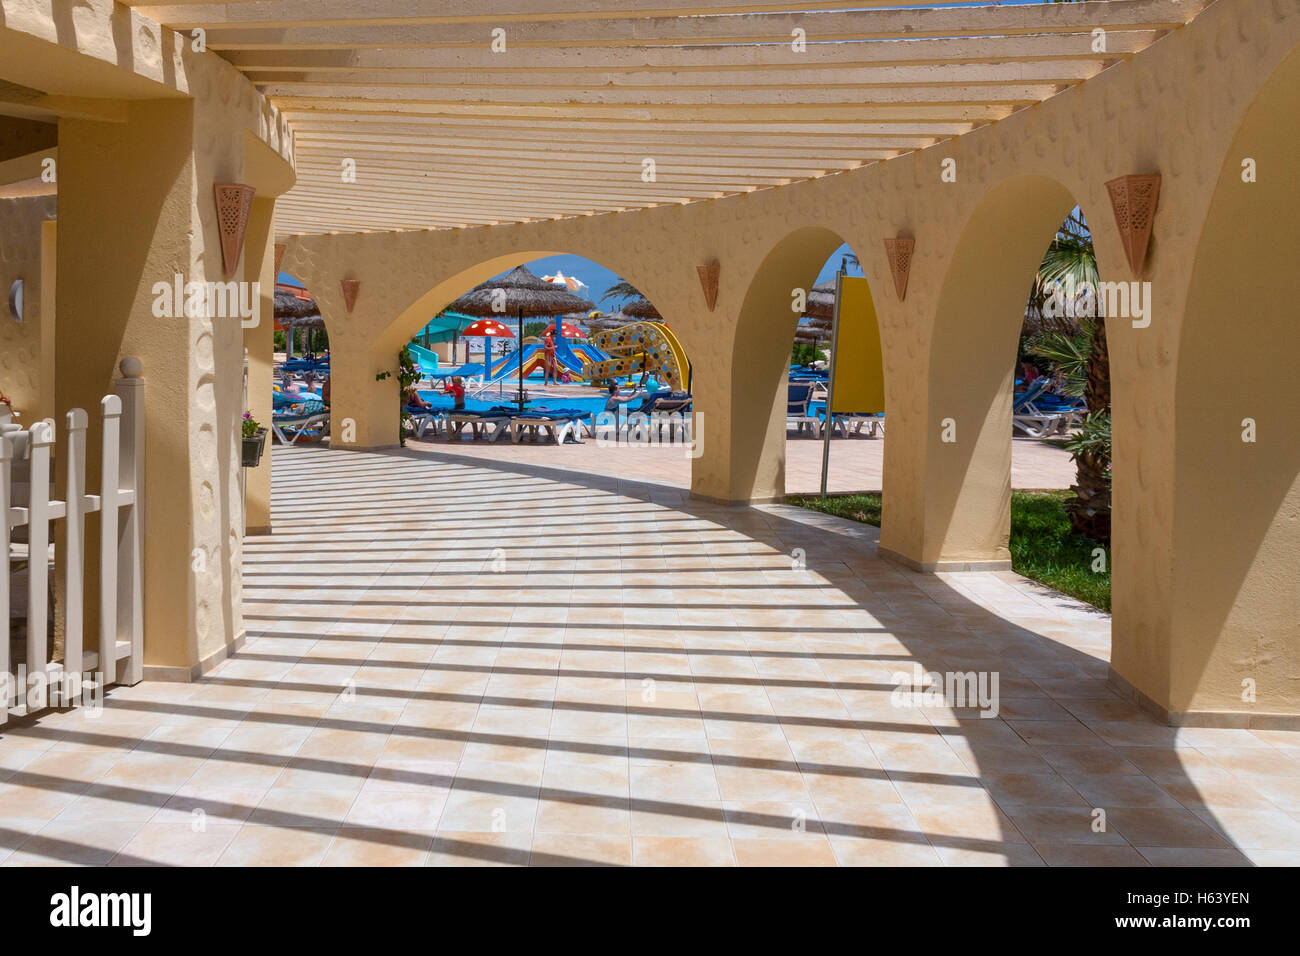 open roof veranda with arches and shadows Stock Photo